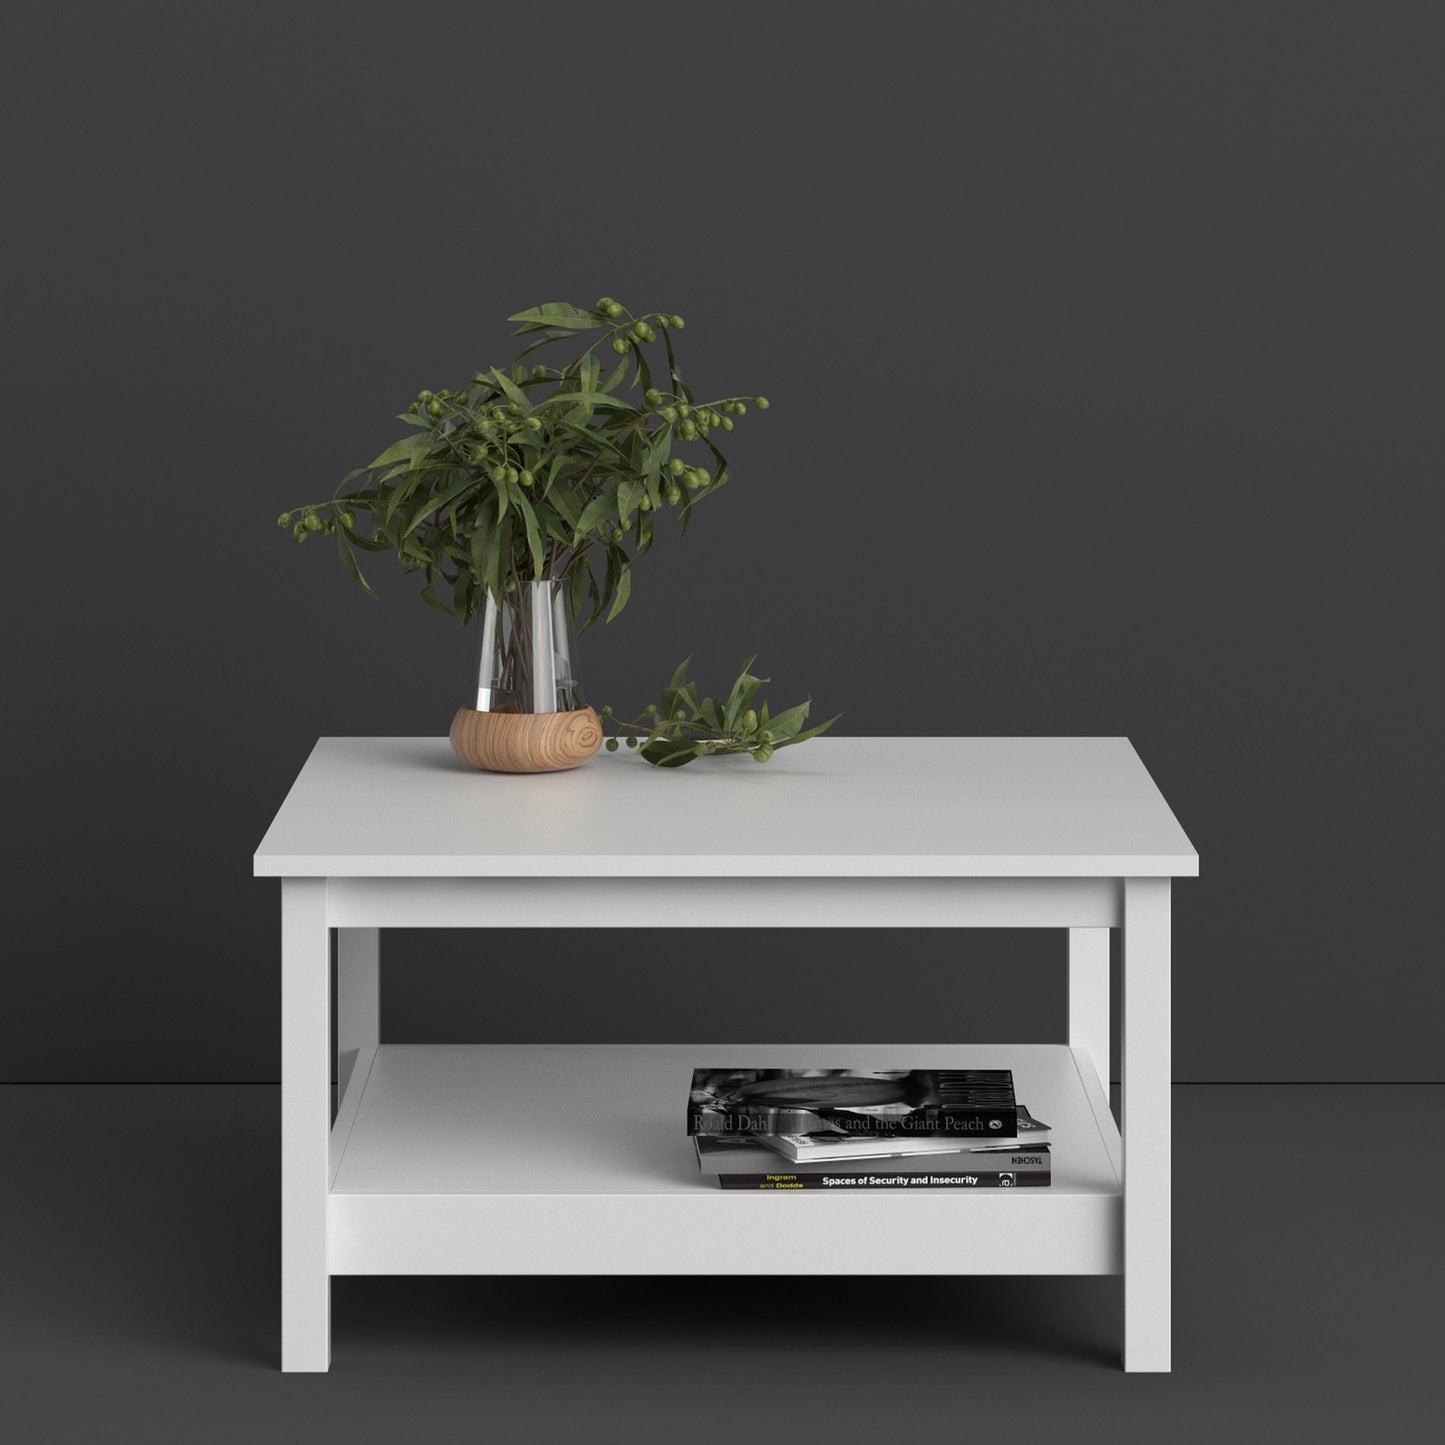 Furniture To Go Madrid Coffee Table in White